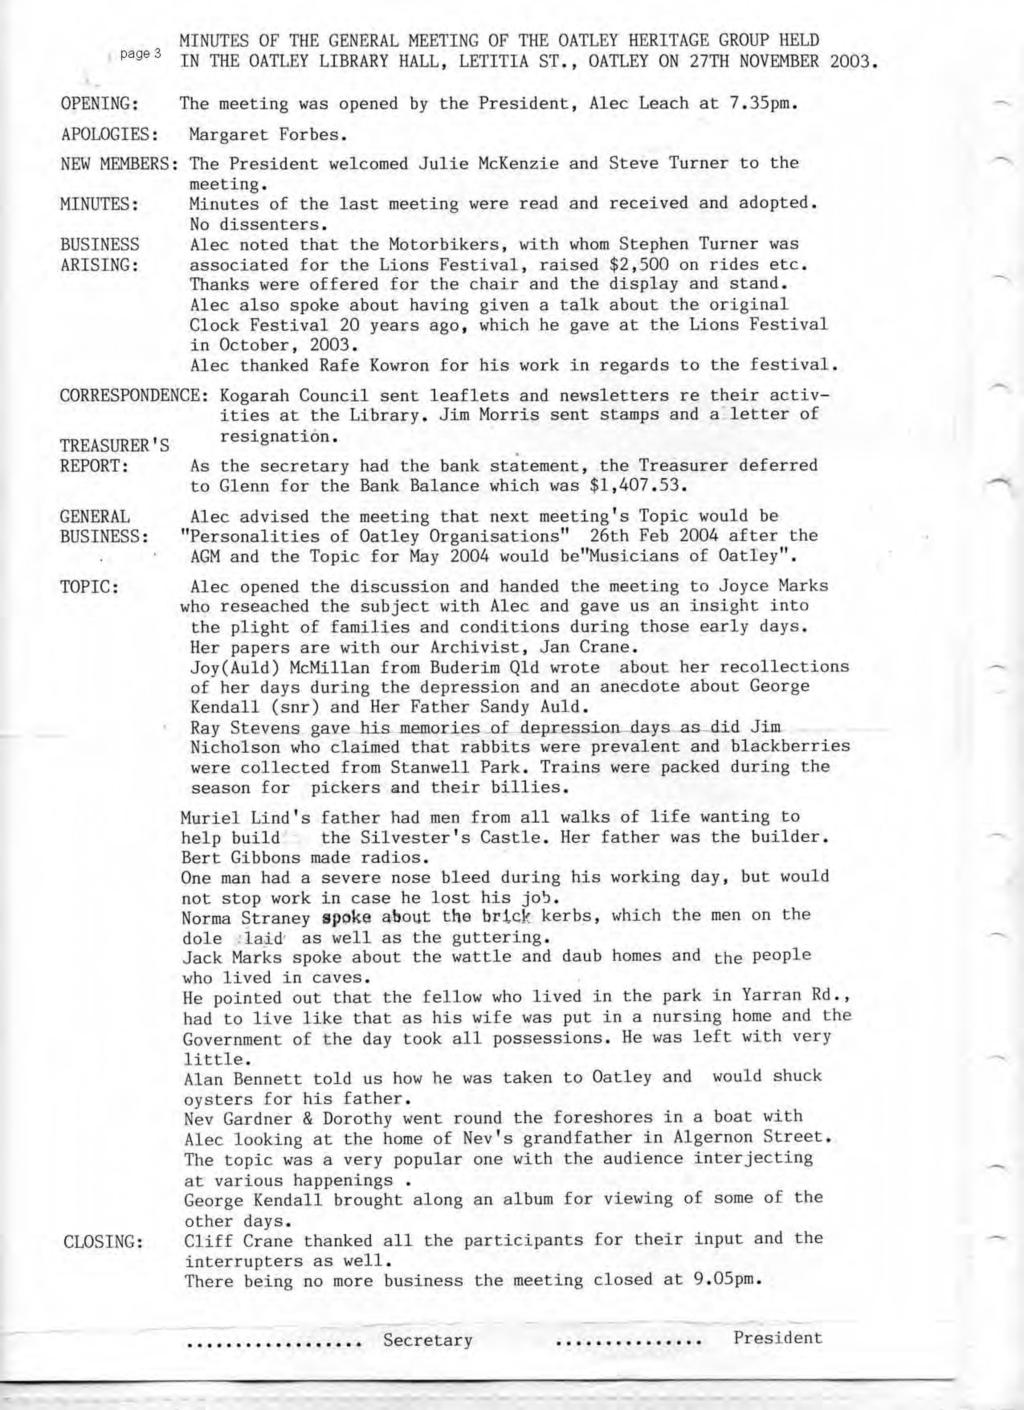 page 3 MINUTES OF THE GENERAL MEETING OF THE OATLEY HERITAGE GROUP HELD IN THE OATLEY LIBRARY HALL, LETITIA ST., OATLEY ON 27TH NOVEMBER 2003.